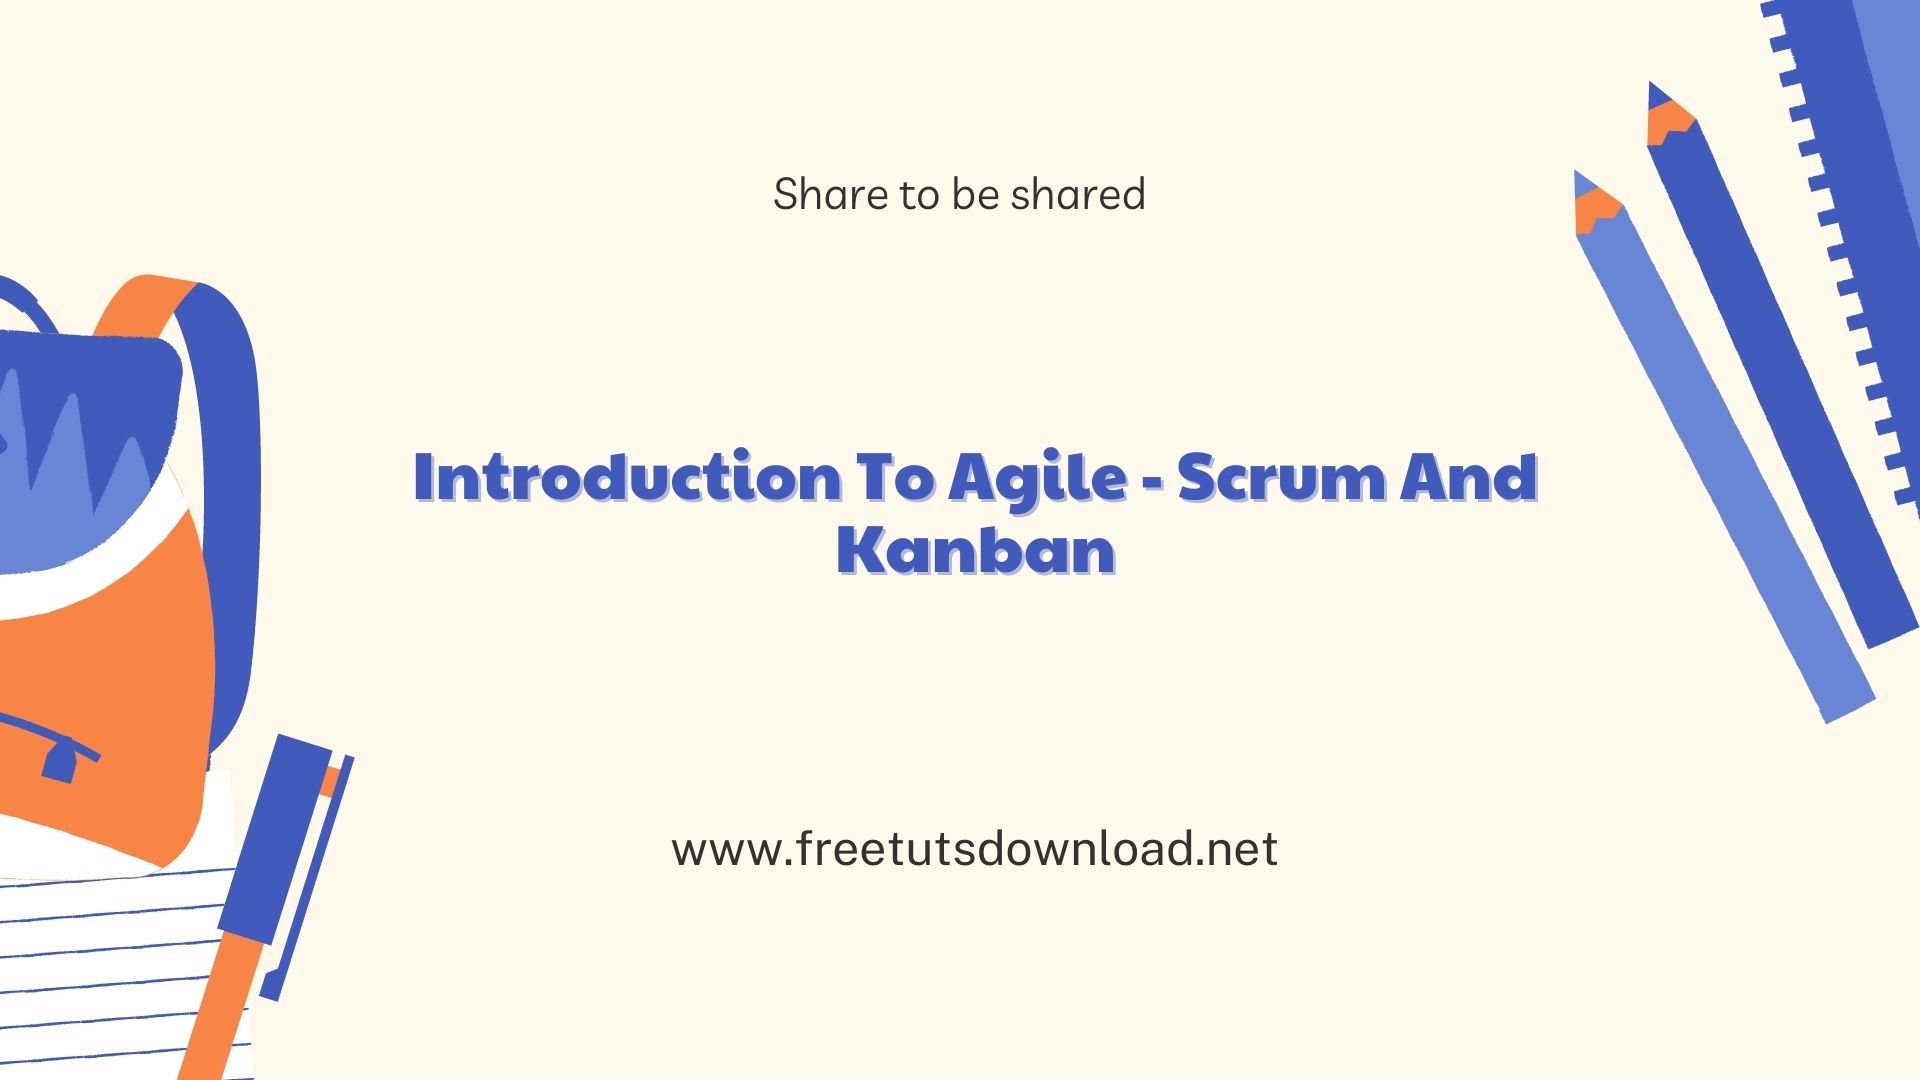 Introduction To Agile - Scrum And Kanban